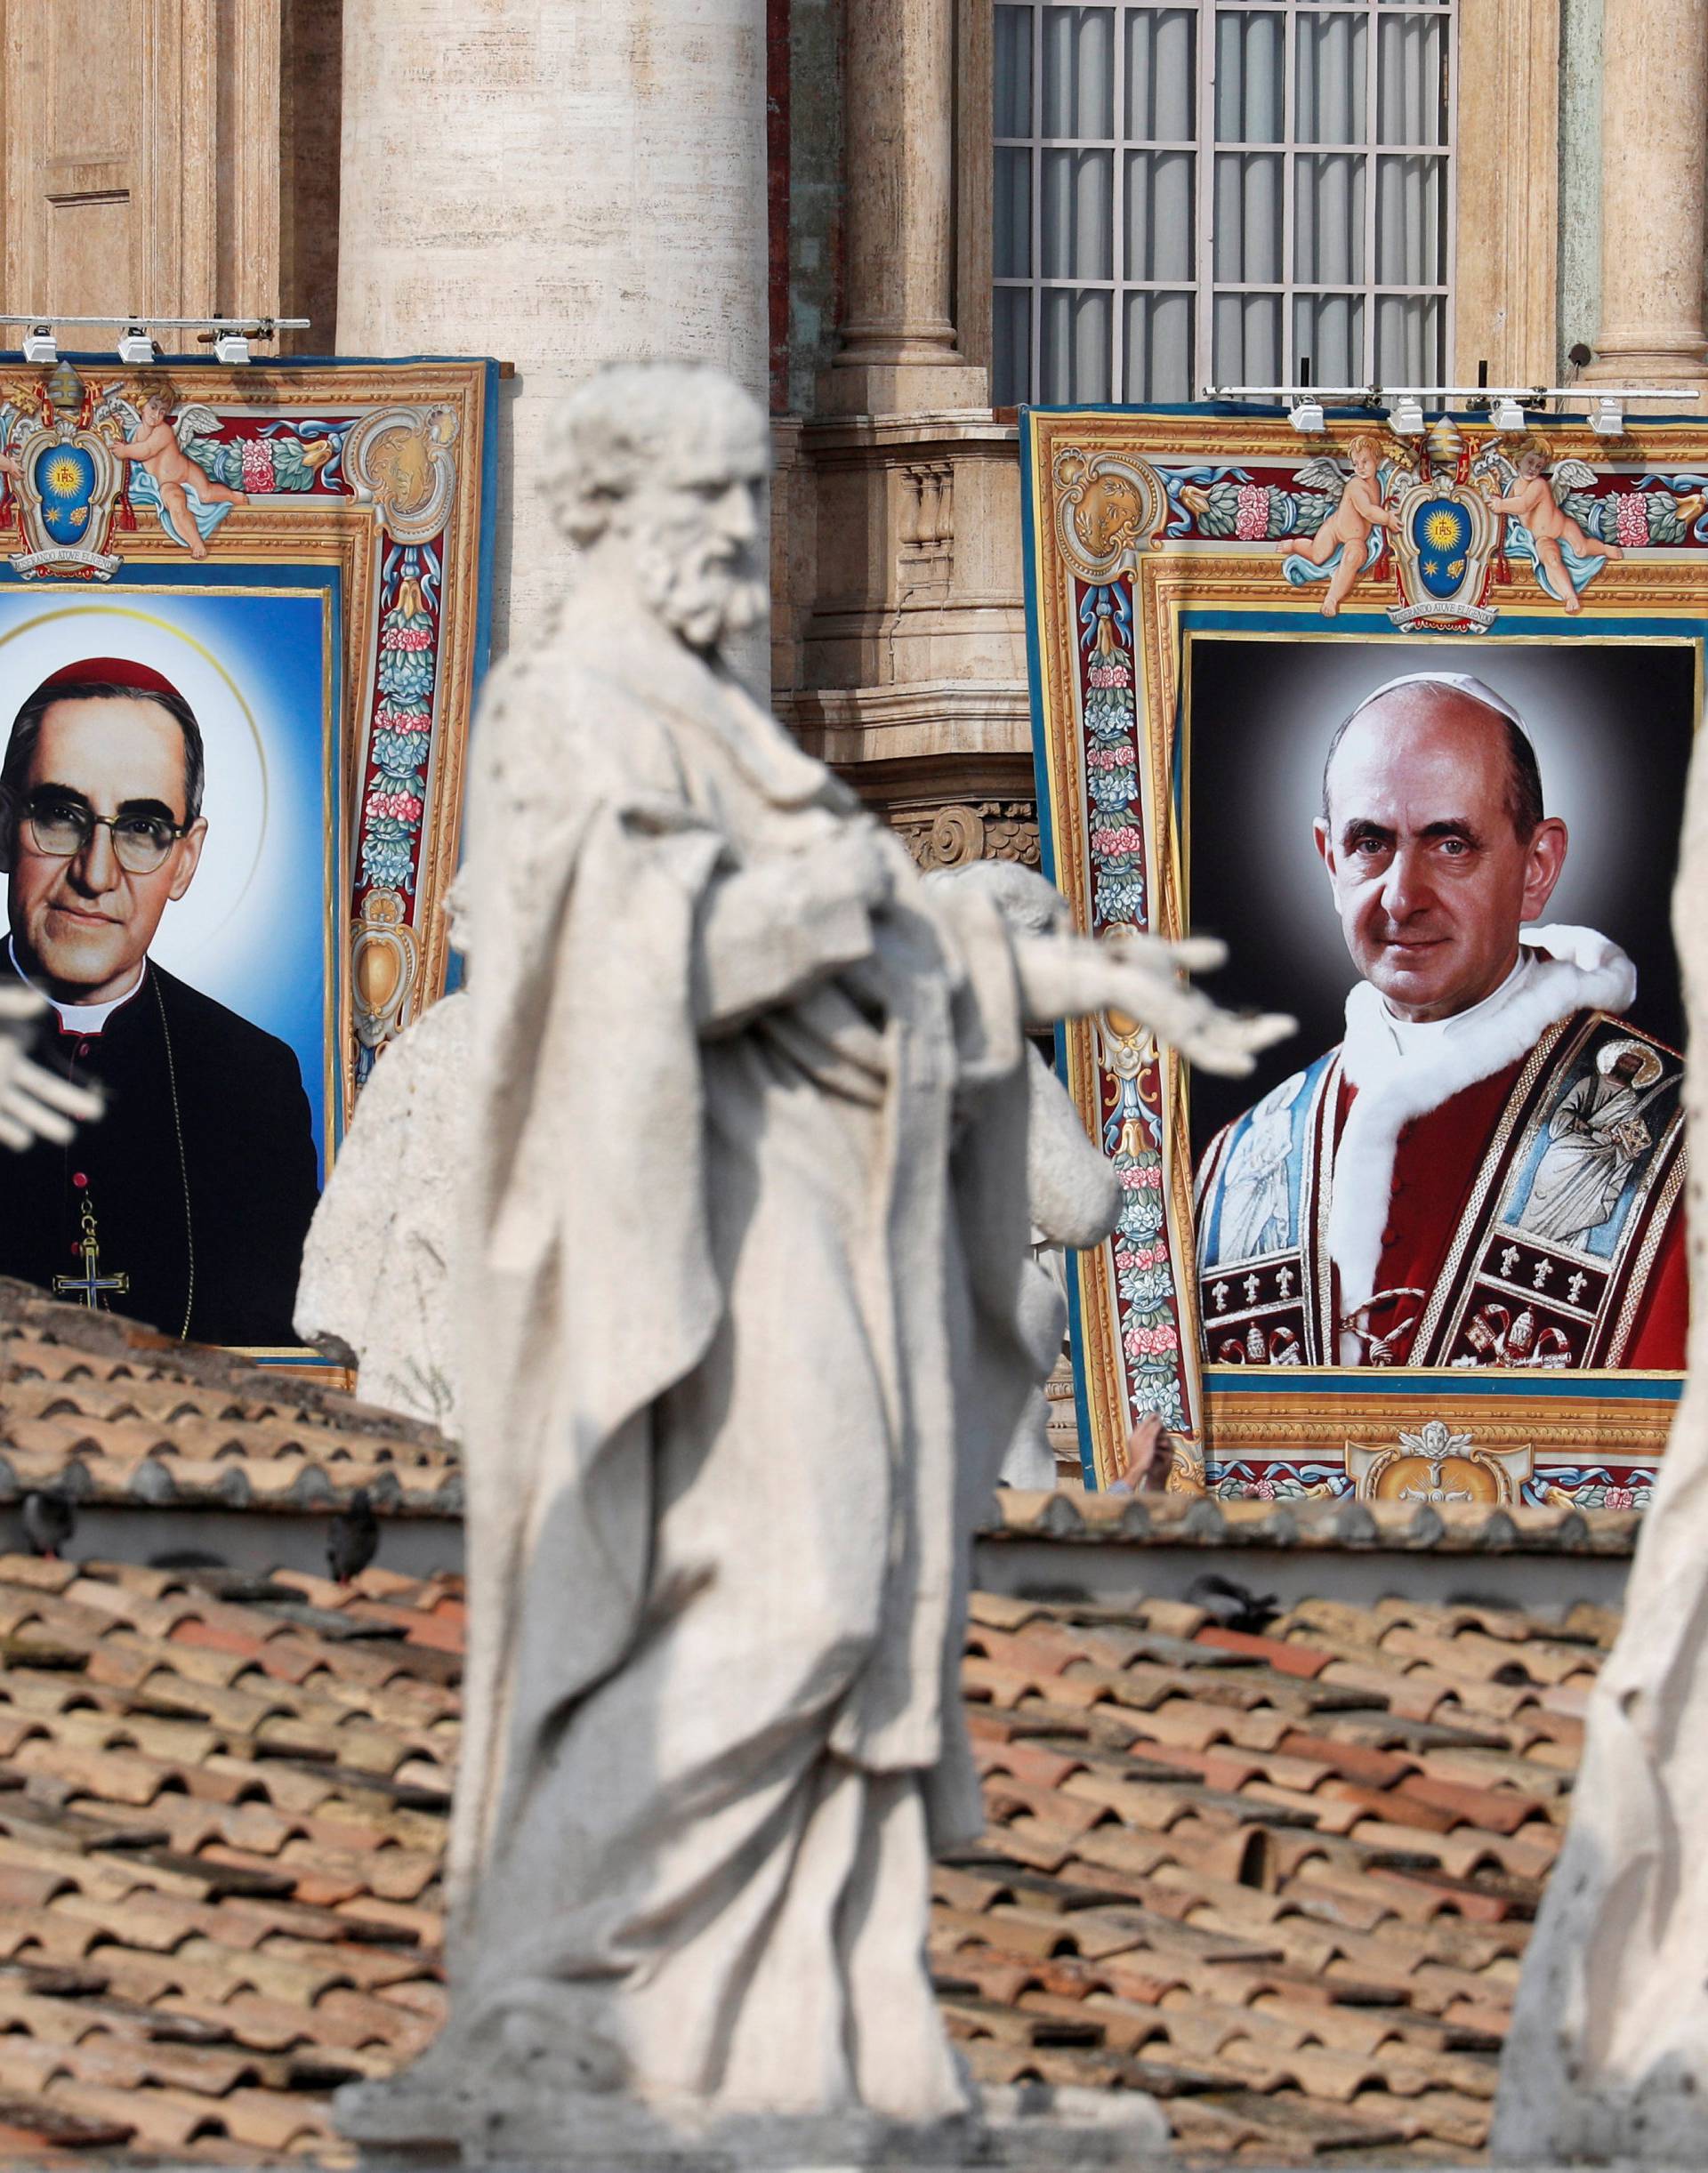 Pope Paul VI and El Salvador's Archbishop Oscar Romero pictures are seen during a Mass for their canonisation at the Vatican